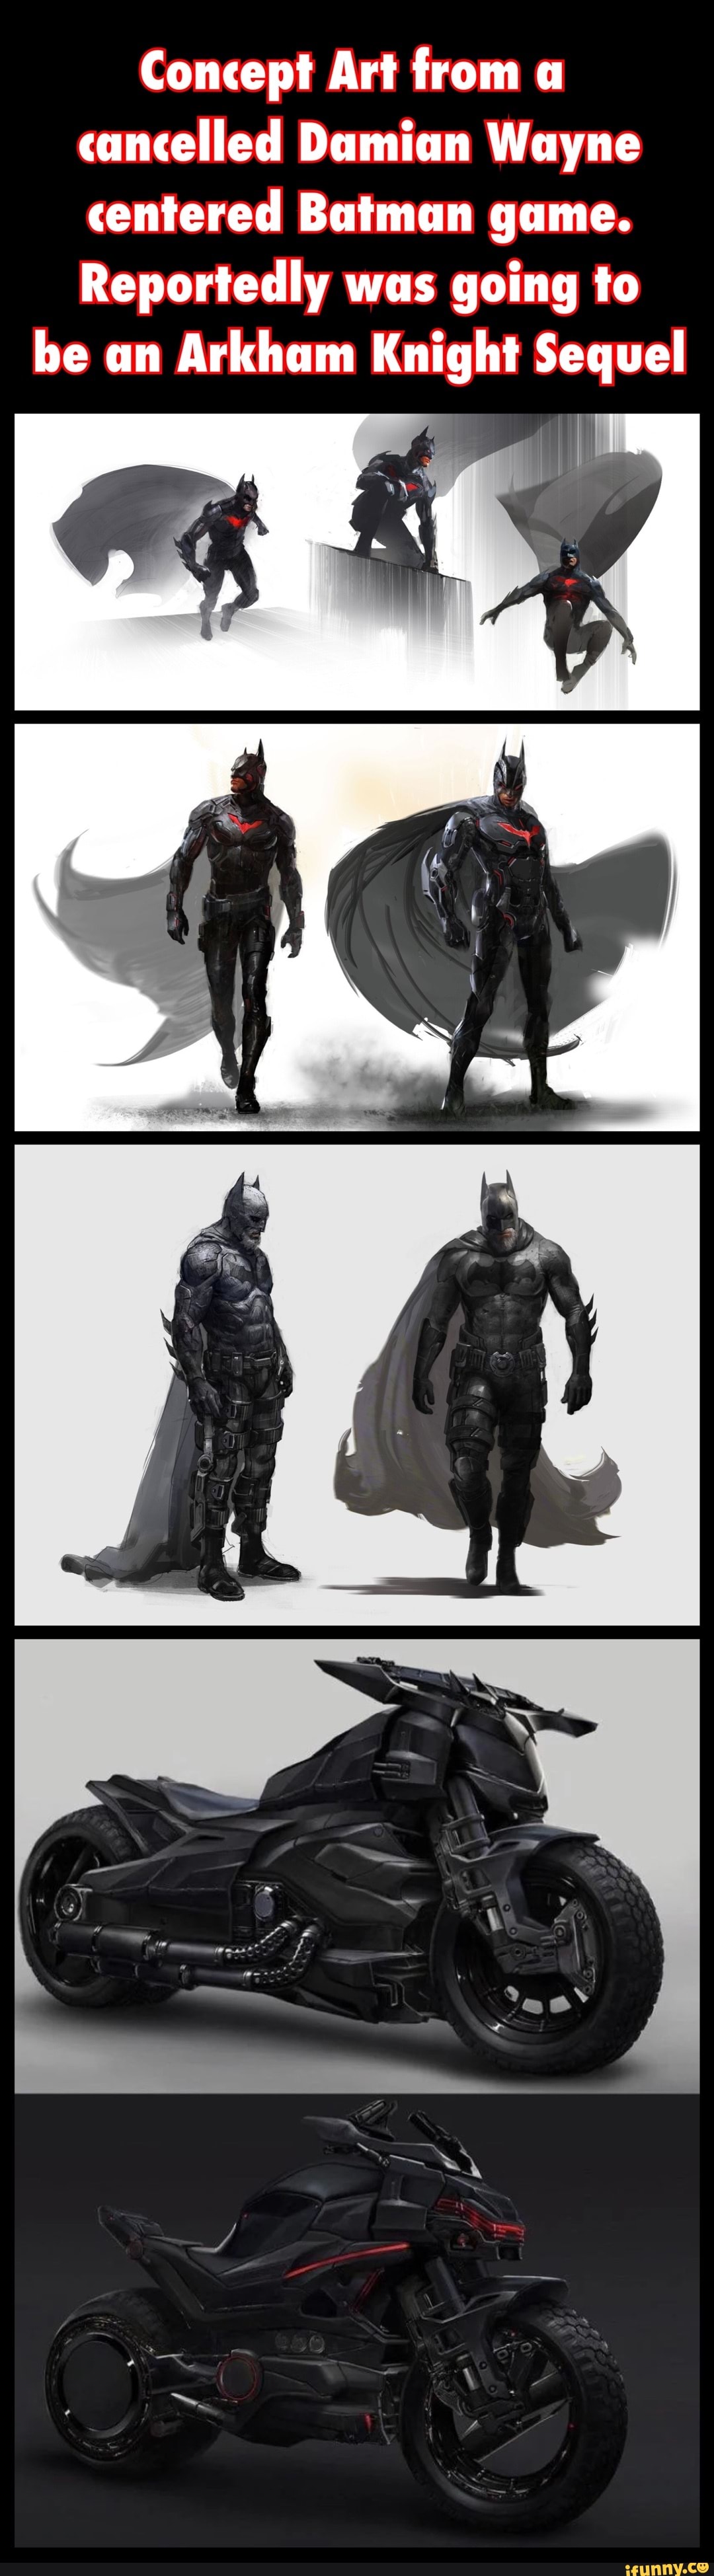 Concept Art from a cancelled Damian Wayne centered Batman game. Reportedly  was going to be an Arkham Knight Sequel - iFunny